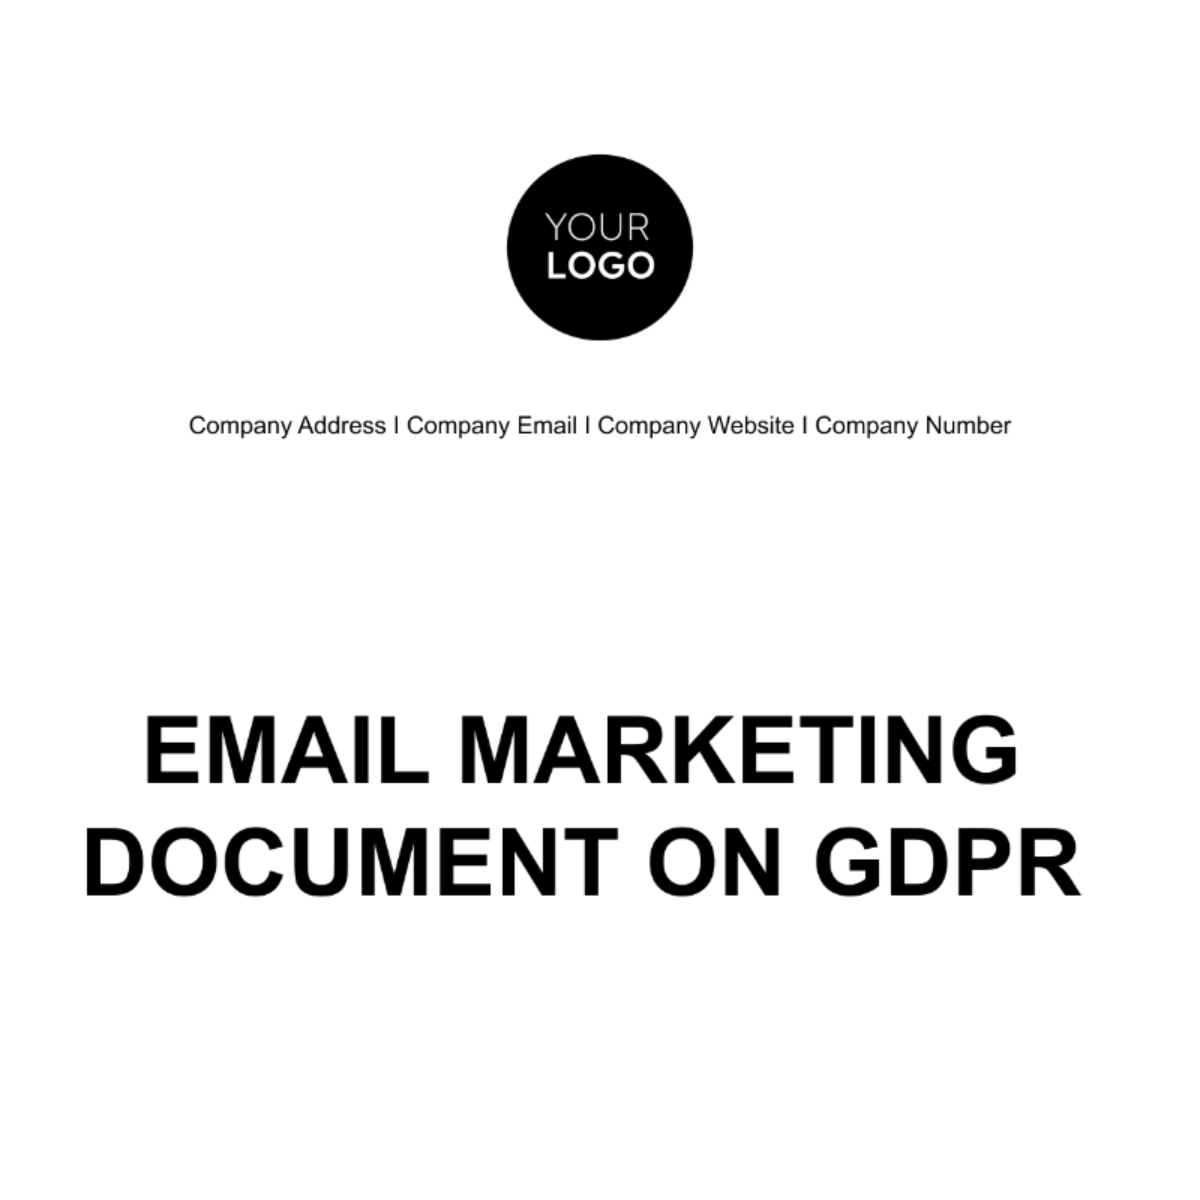 Email Marketing Document on GDPR Template